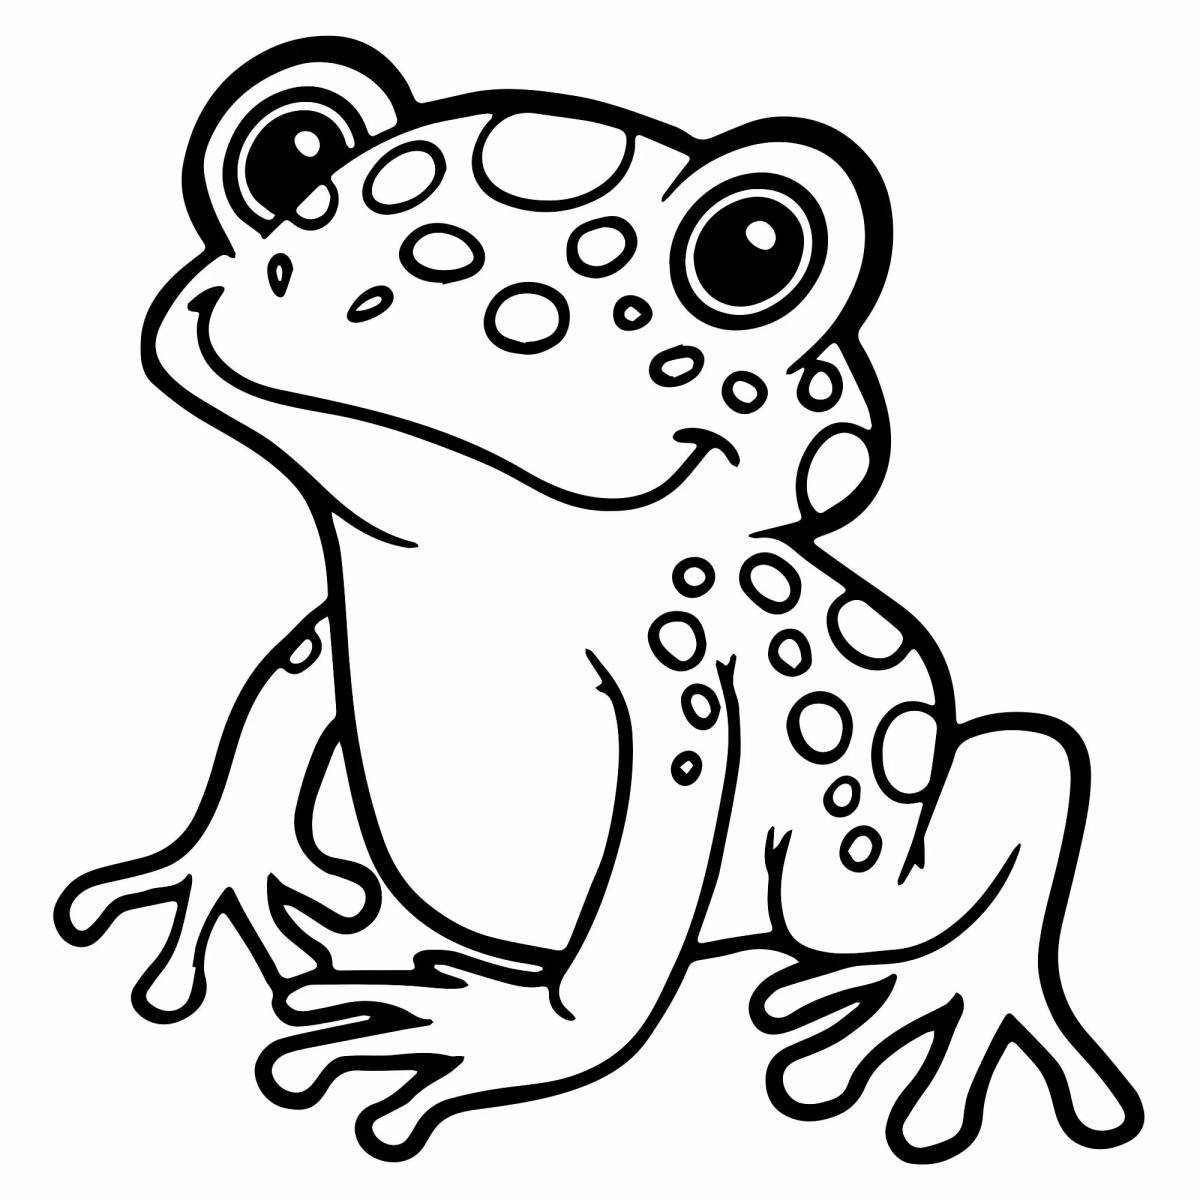 Froggy's happy coloring